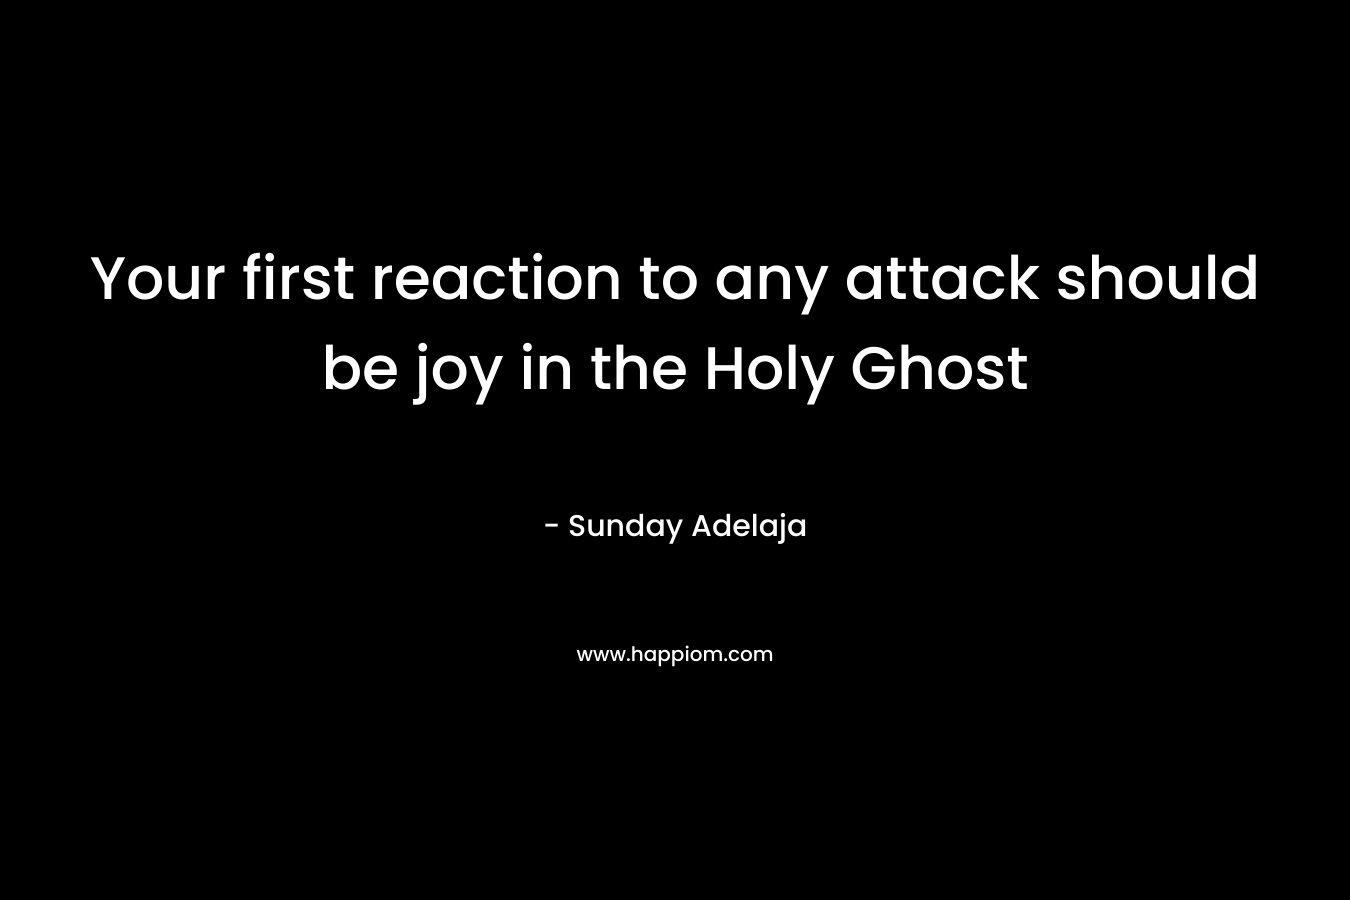 Your first reaction to any attack should be joy in the Holy Ghost